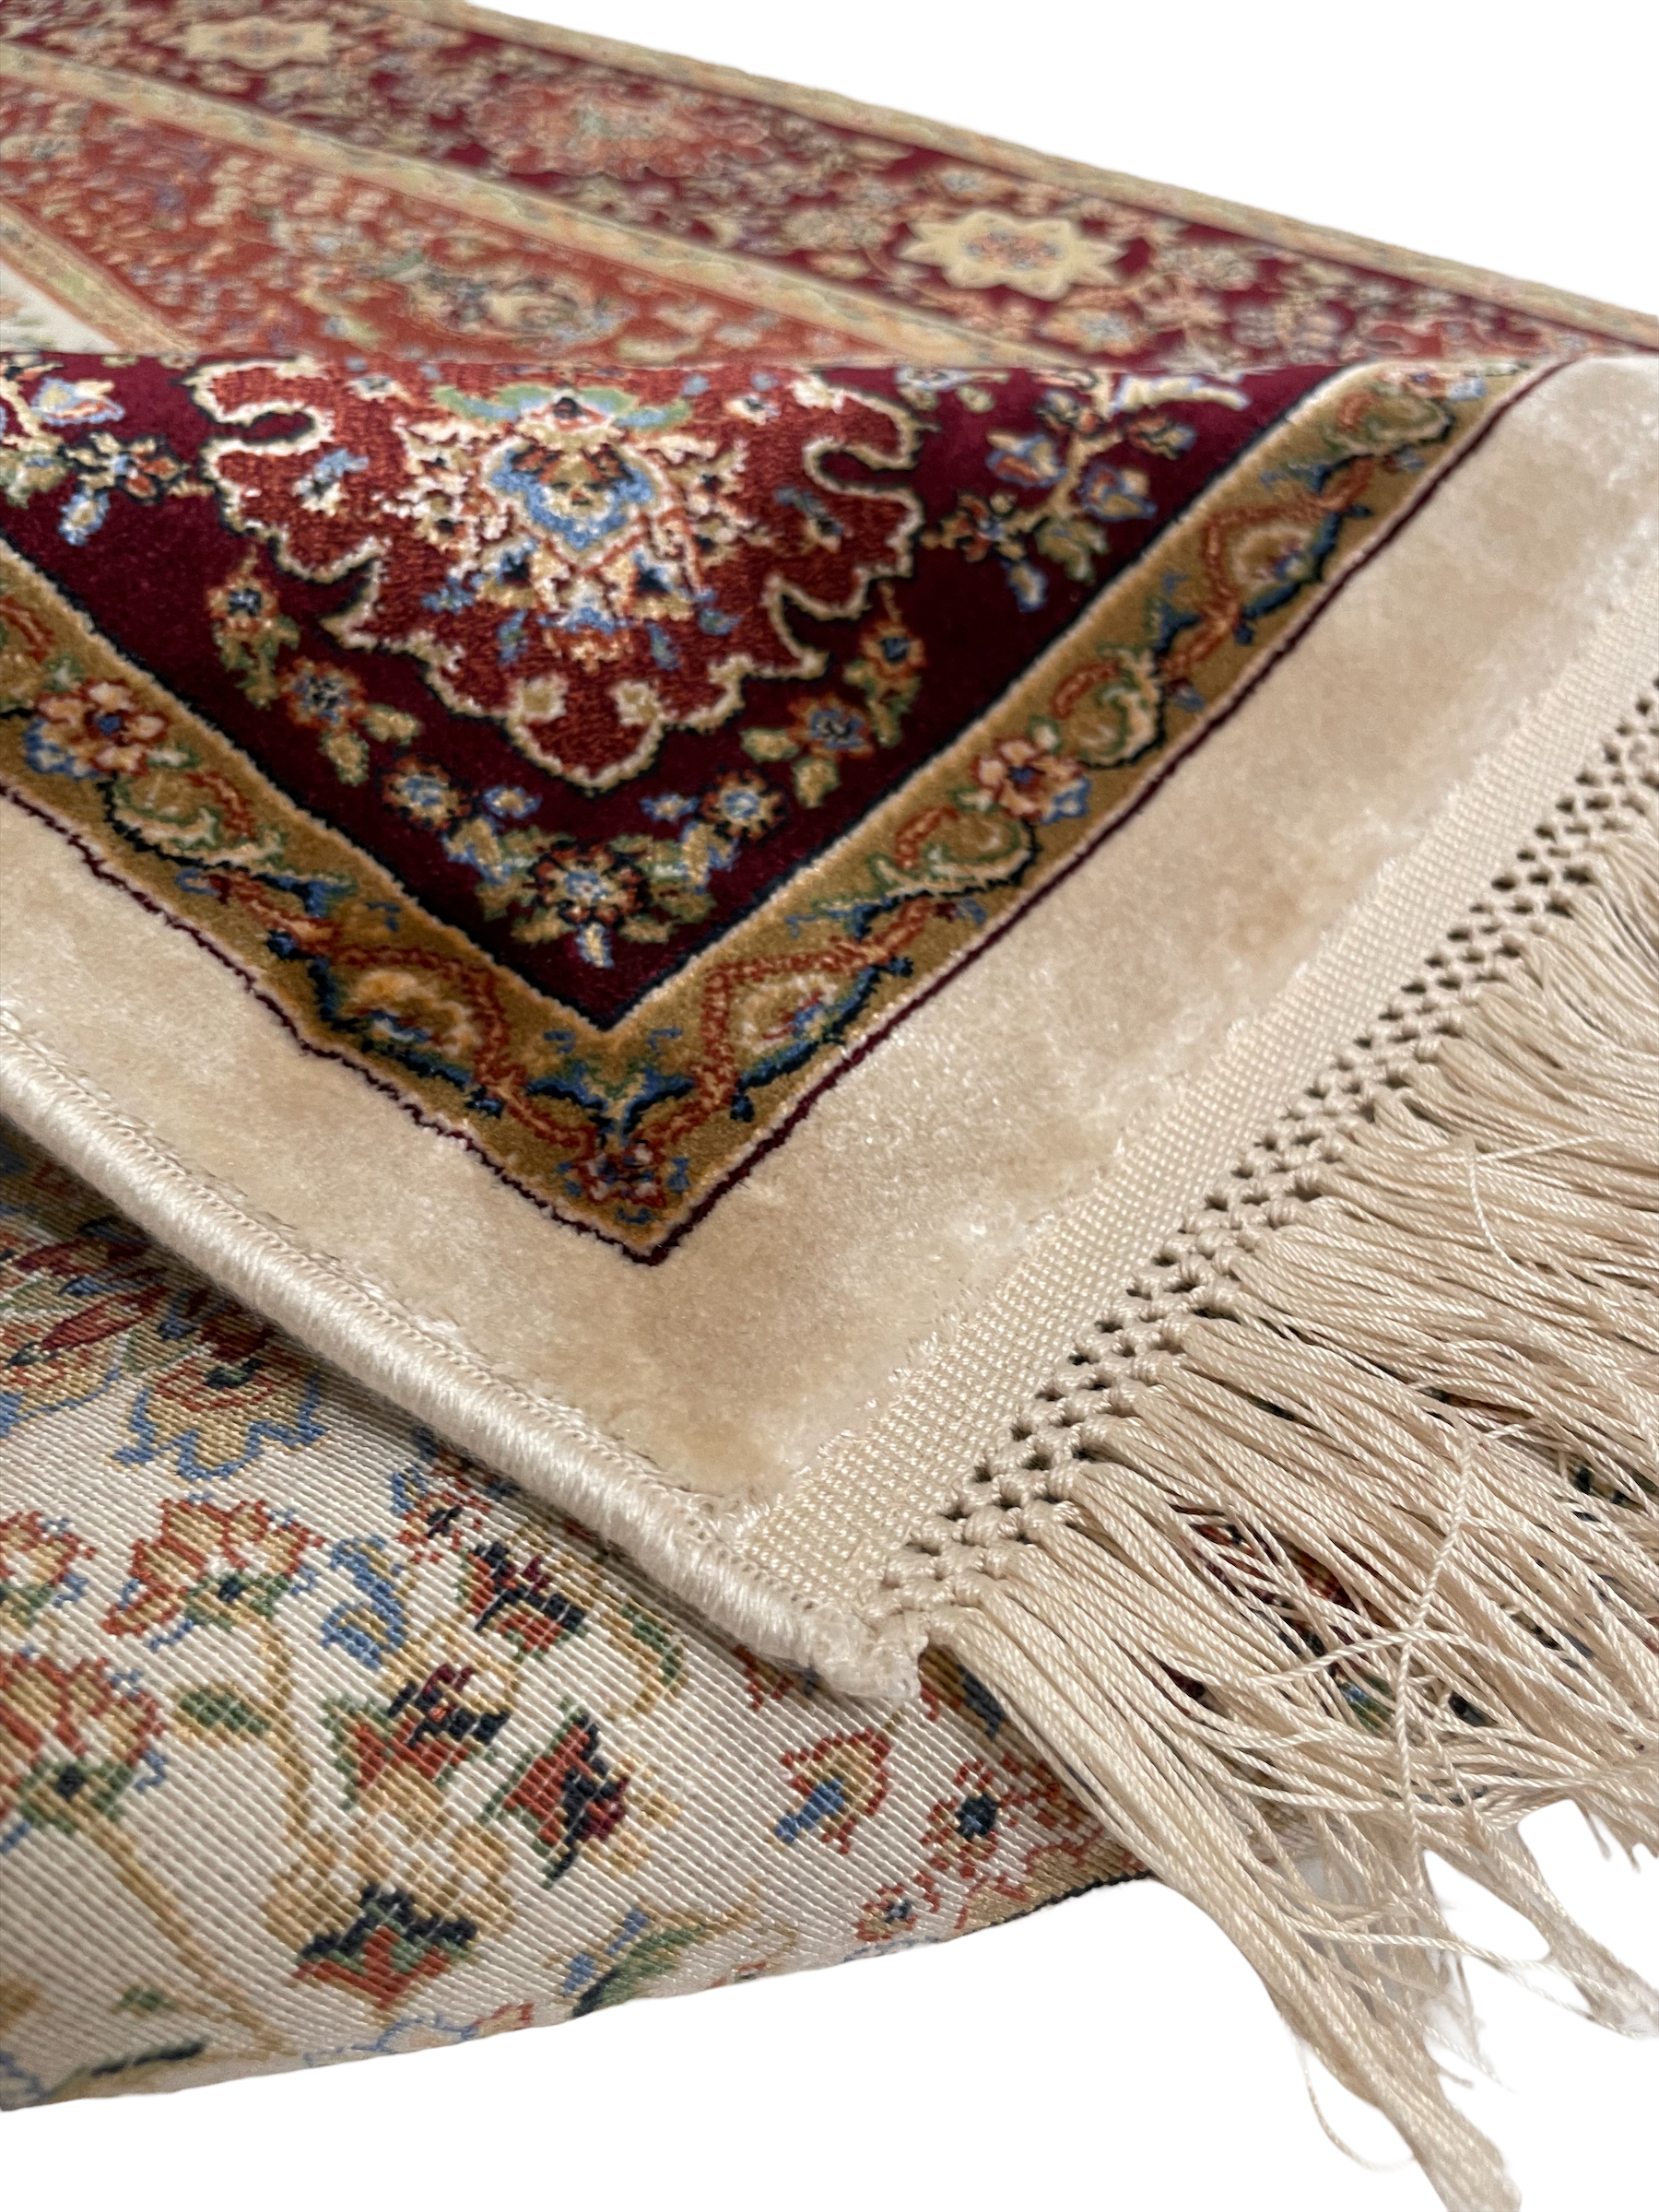 The Himma rug displays the traditional Islamic "mihrab" design with elegant floral elements.